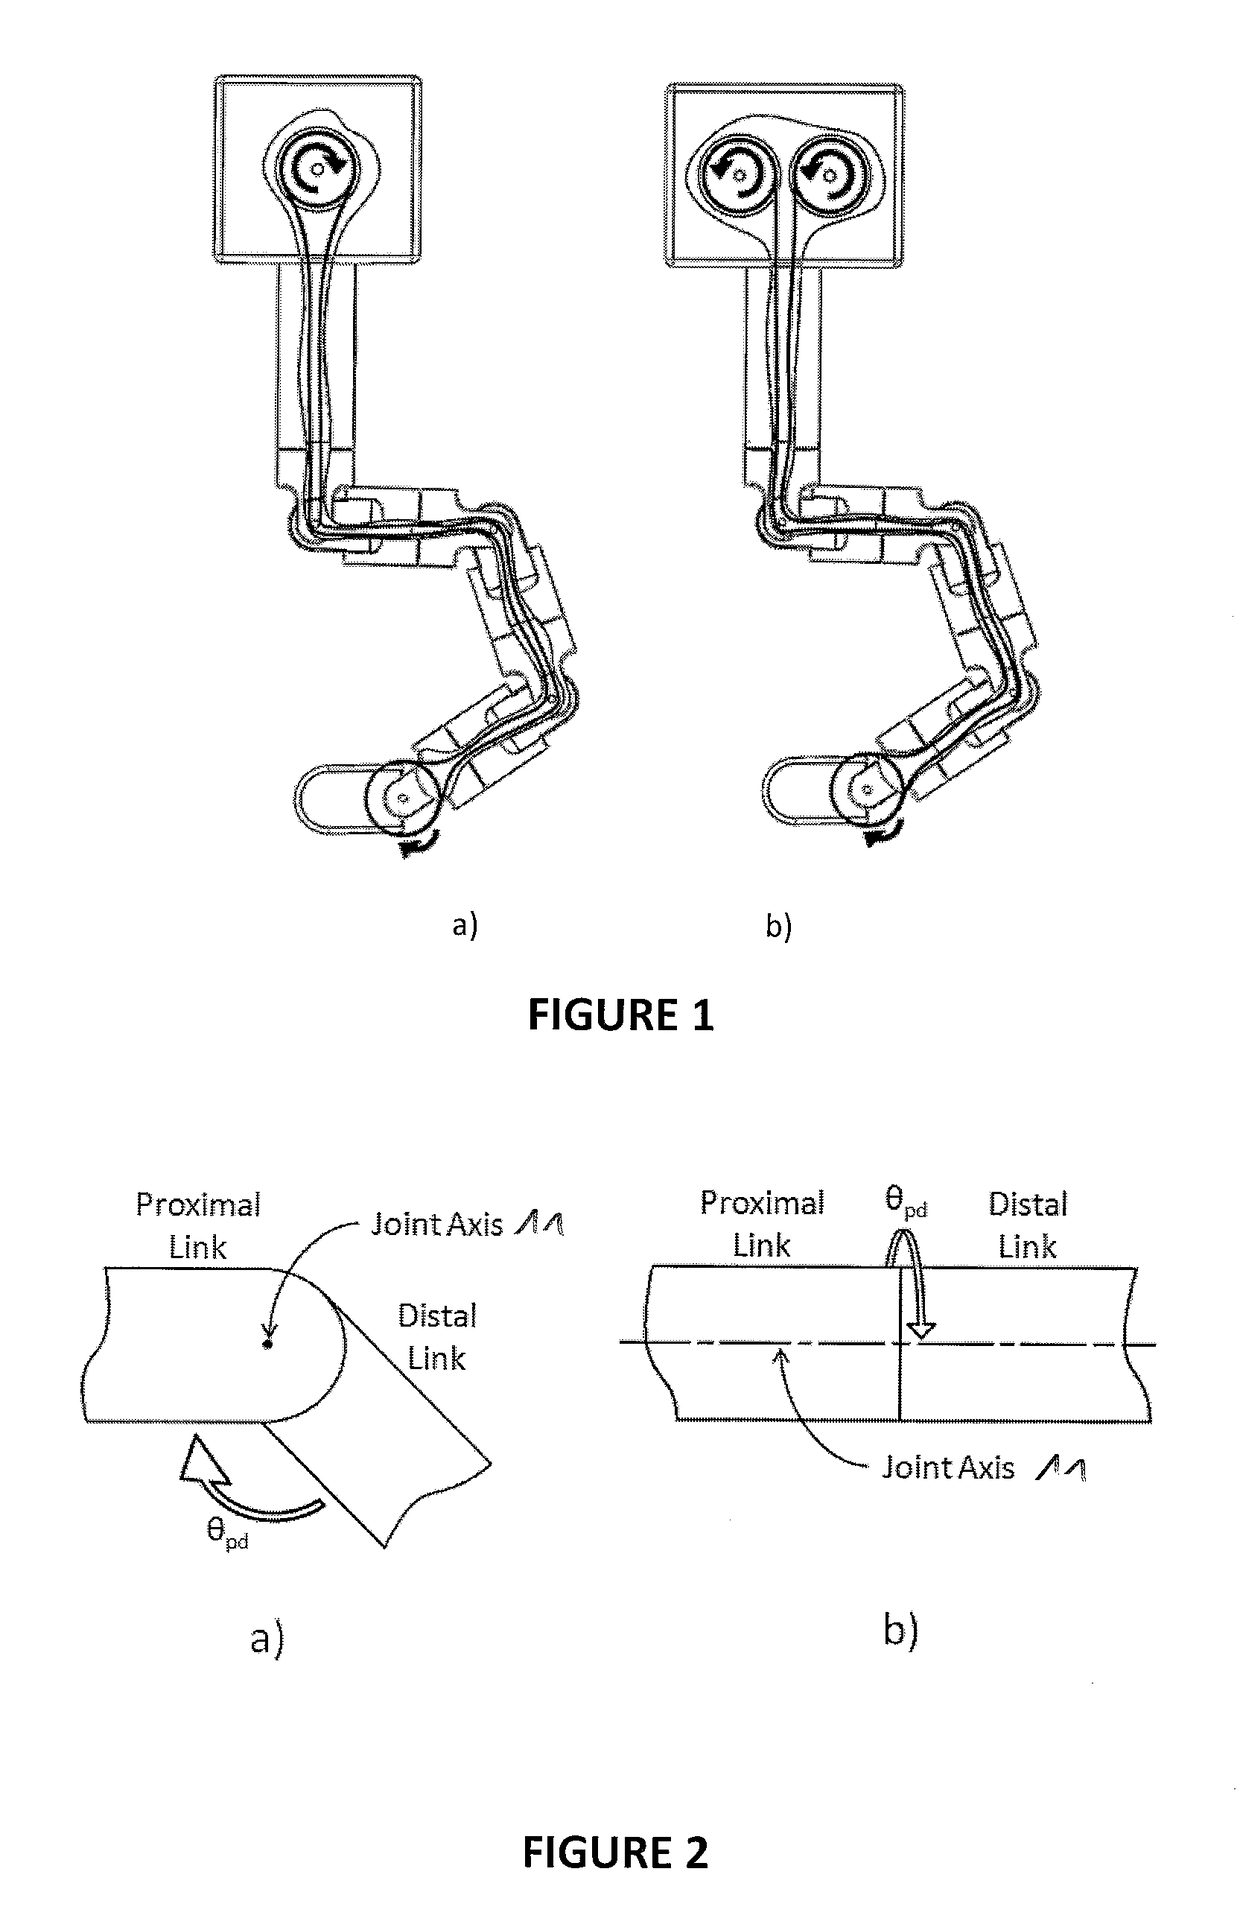 Mechanical manipulator for surgical instruments